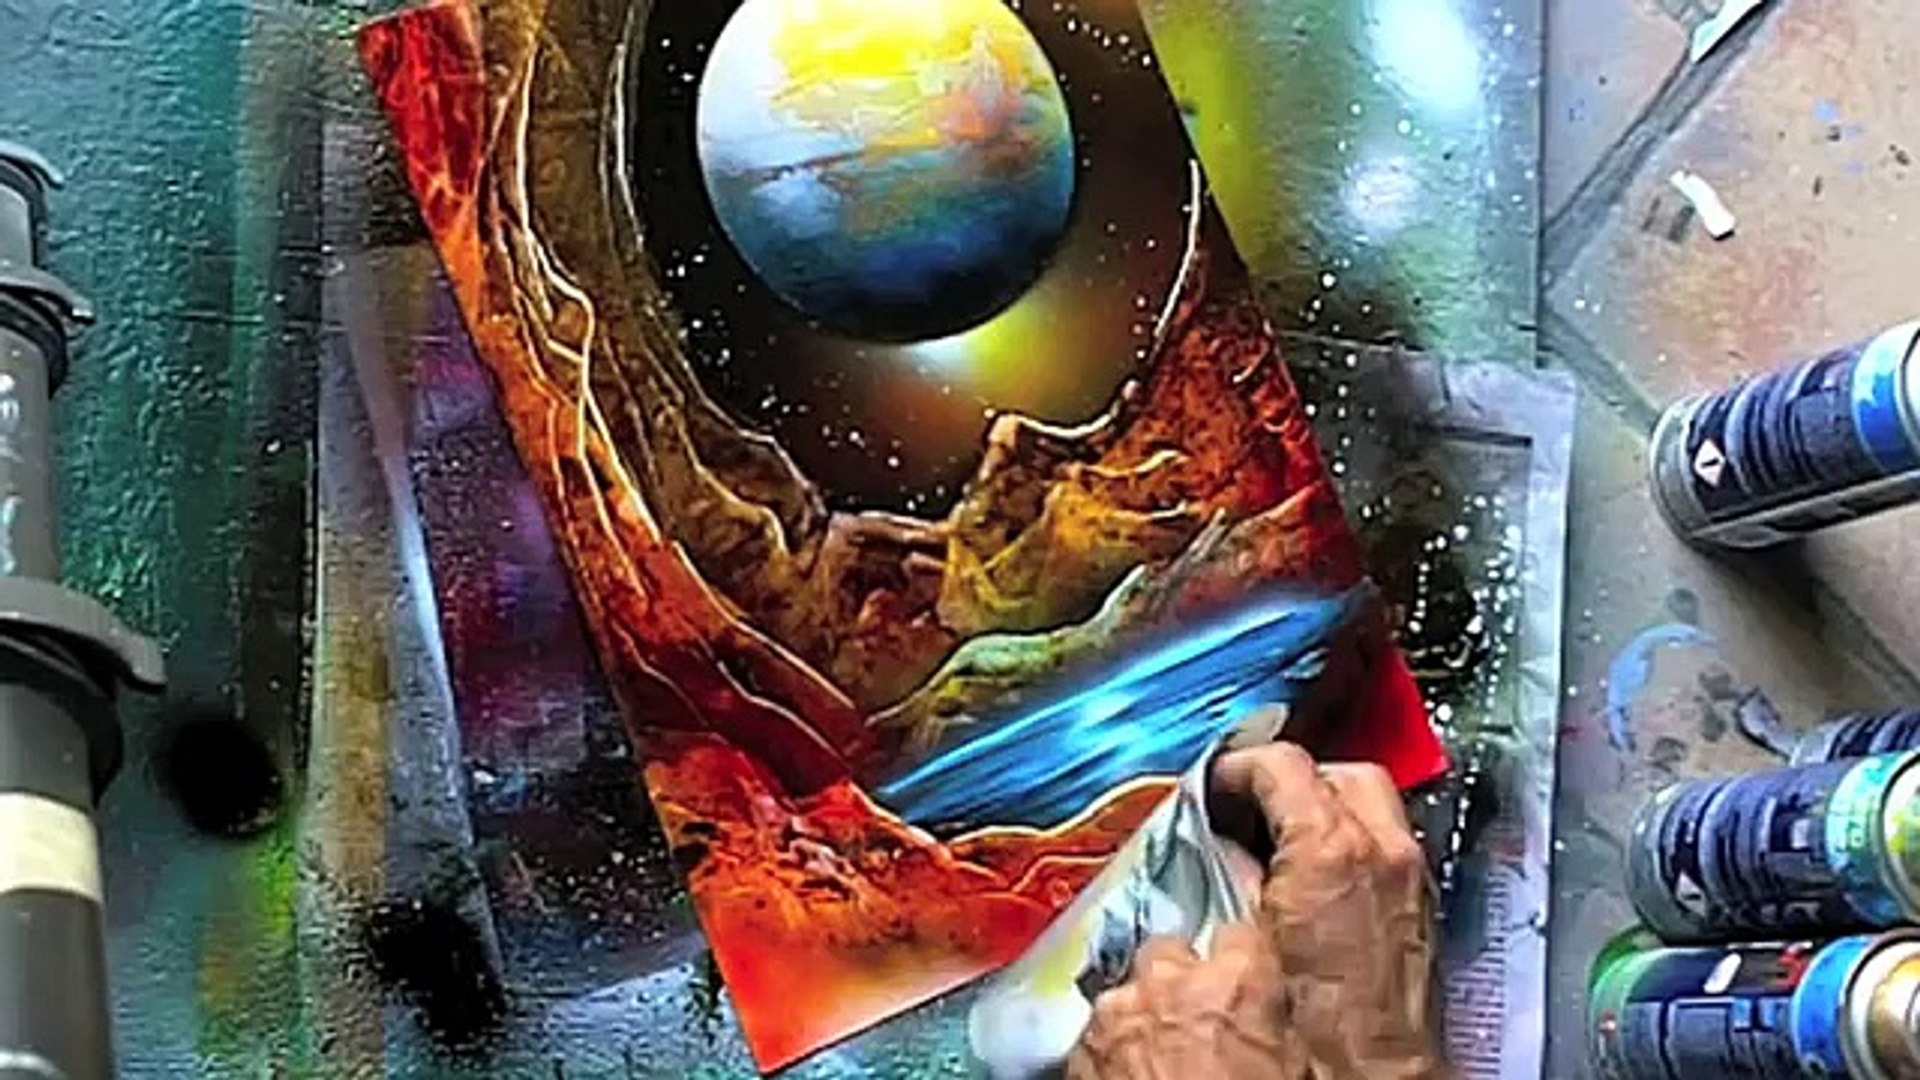 Spray paint art secrets june 2014, spray paint waterfalls, planets in red,  moons,boats - video Dailymotion